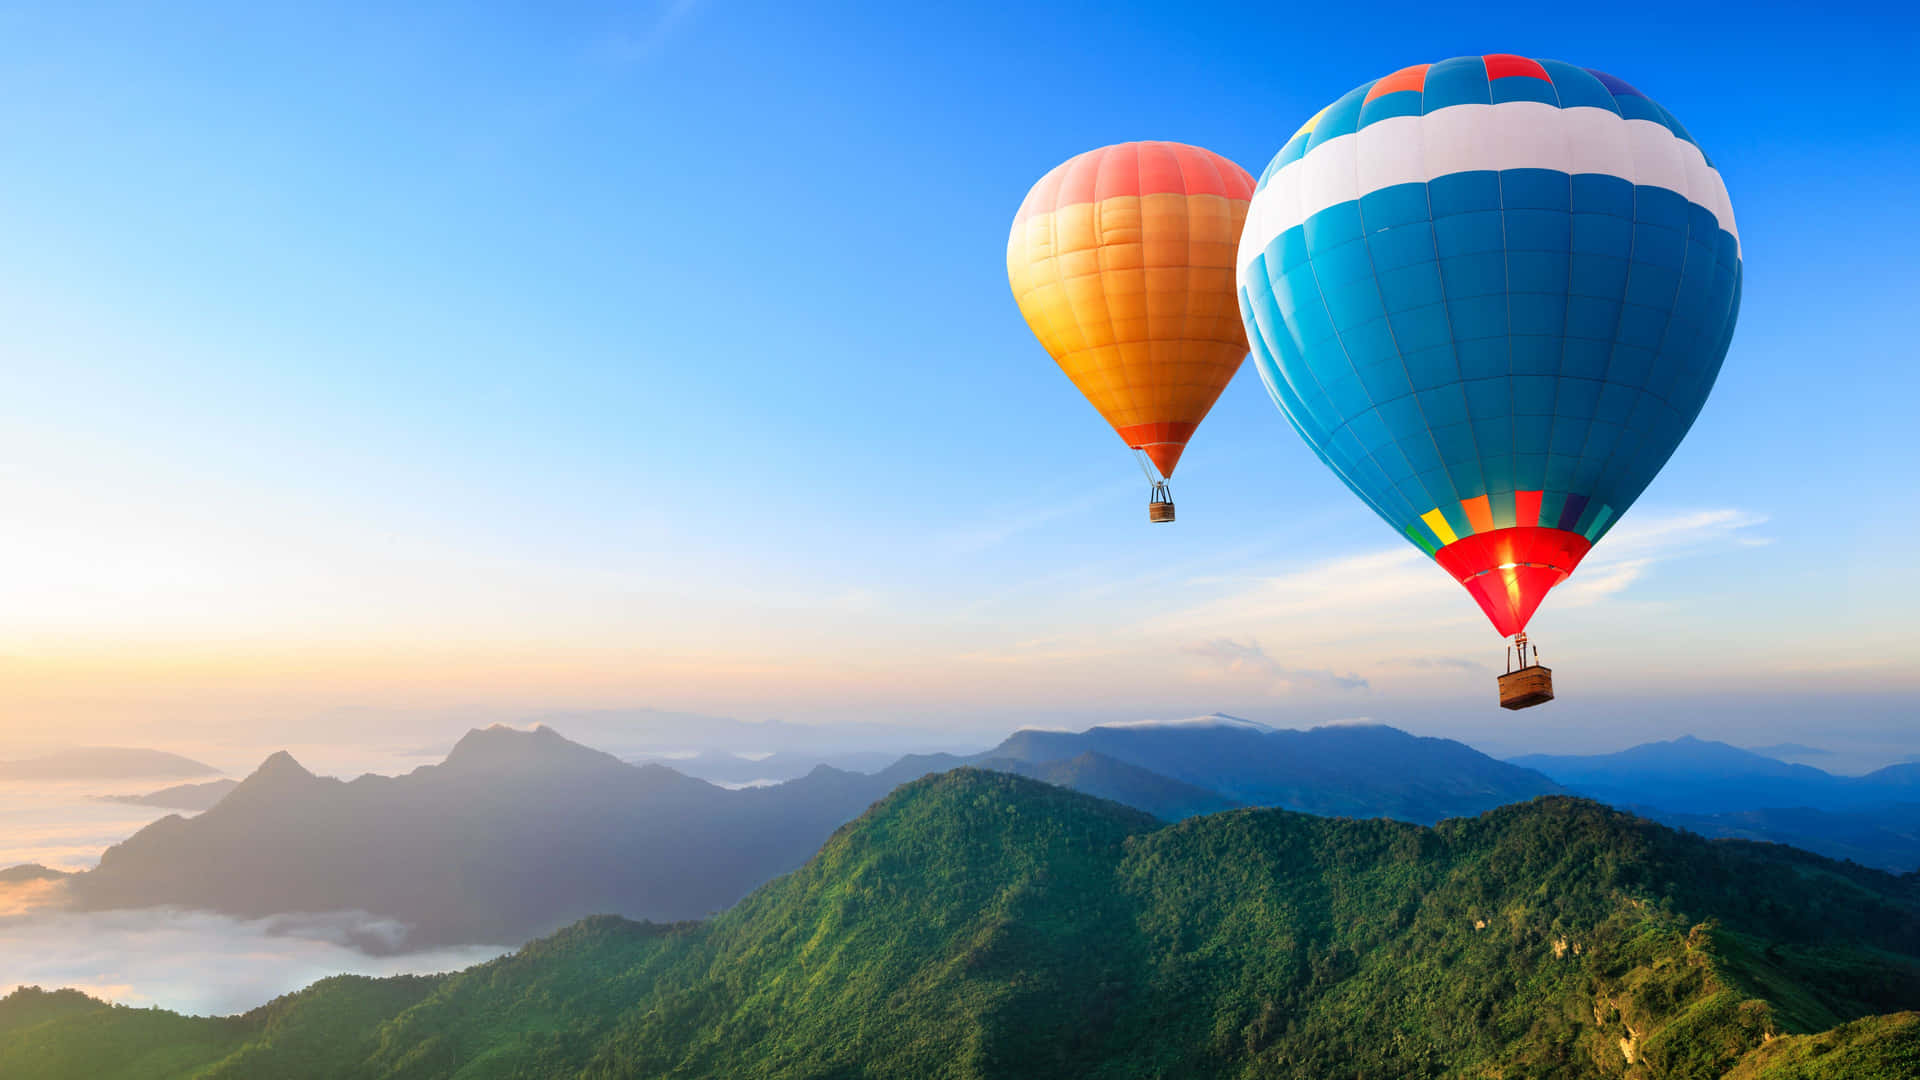 See the world from a new perspective with a Hot Air Balloon Ride